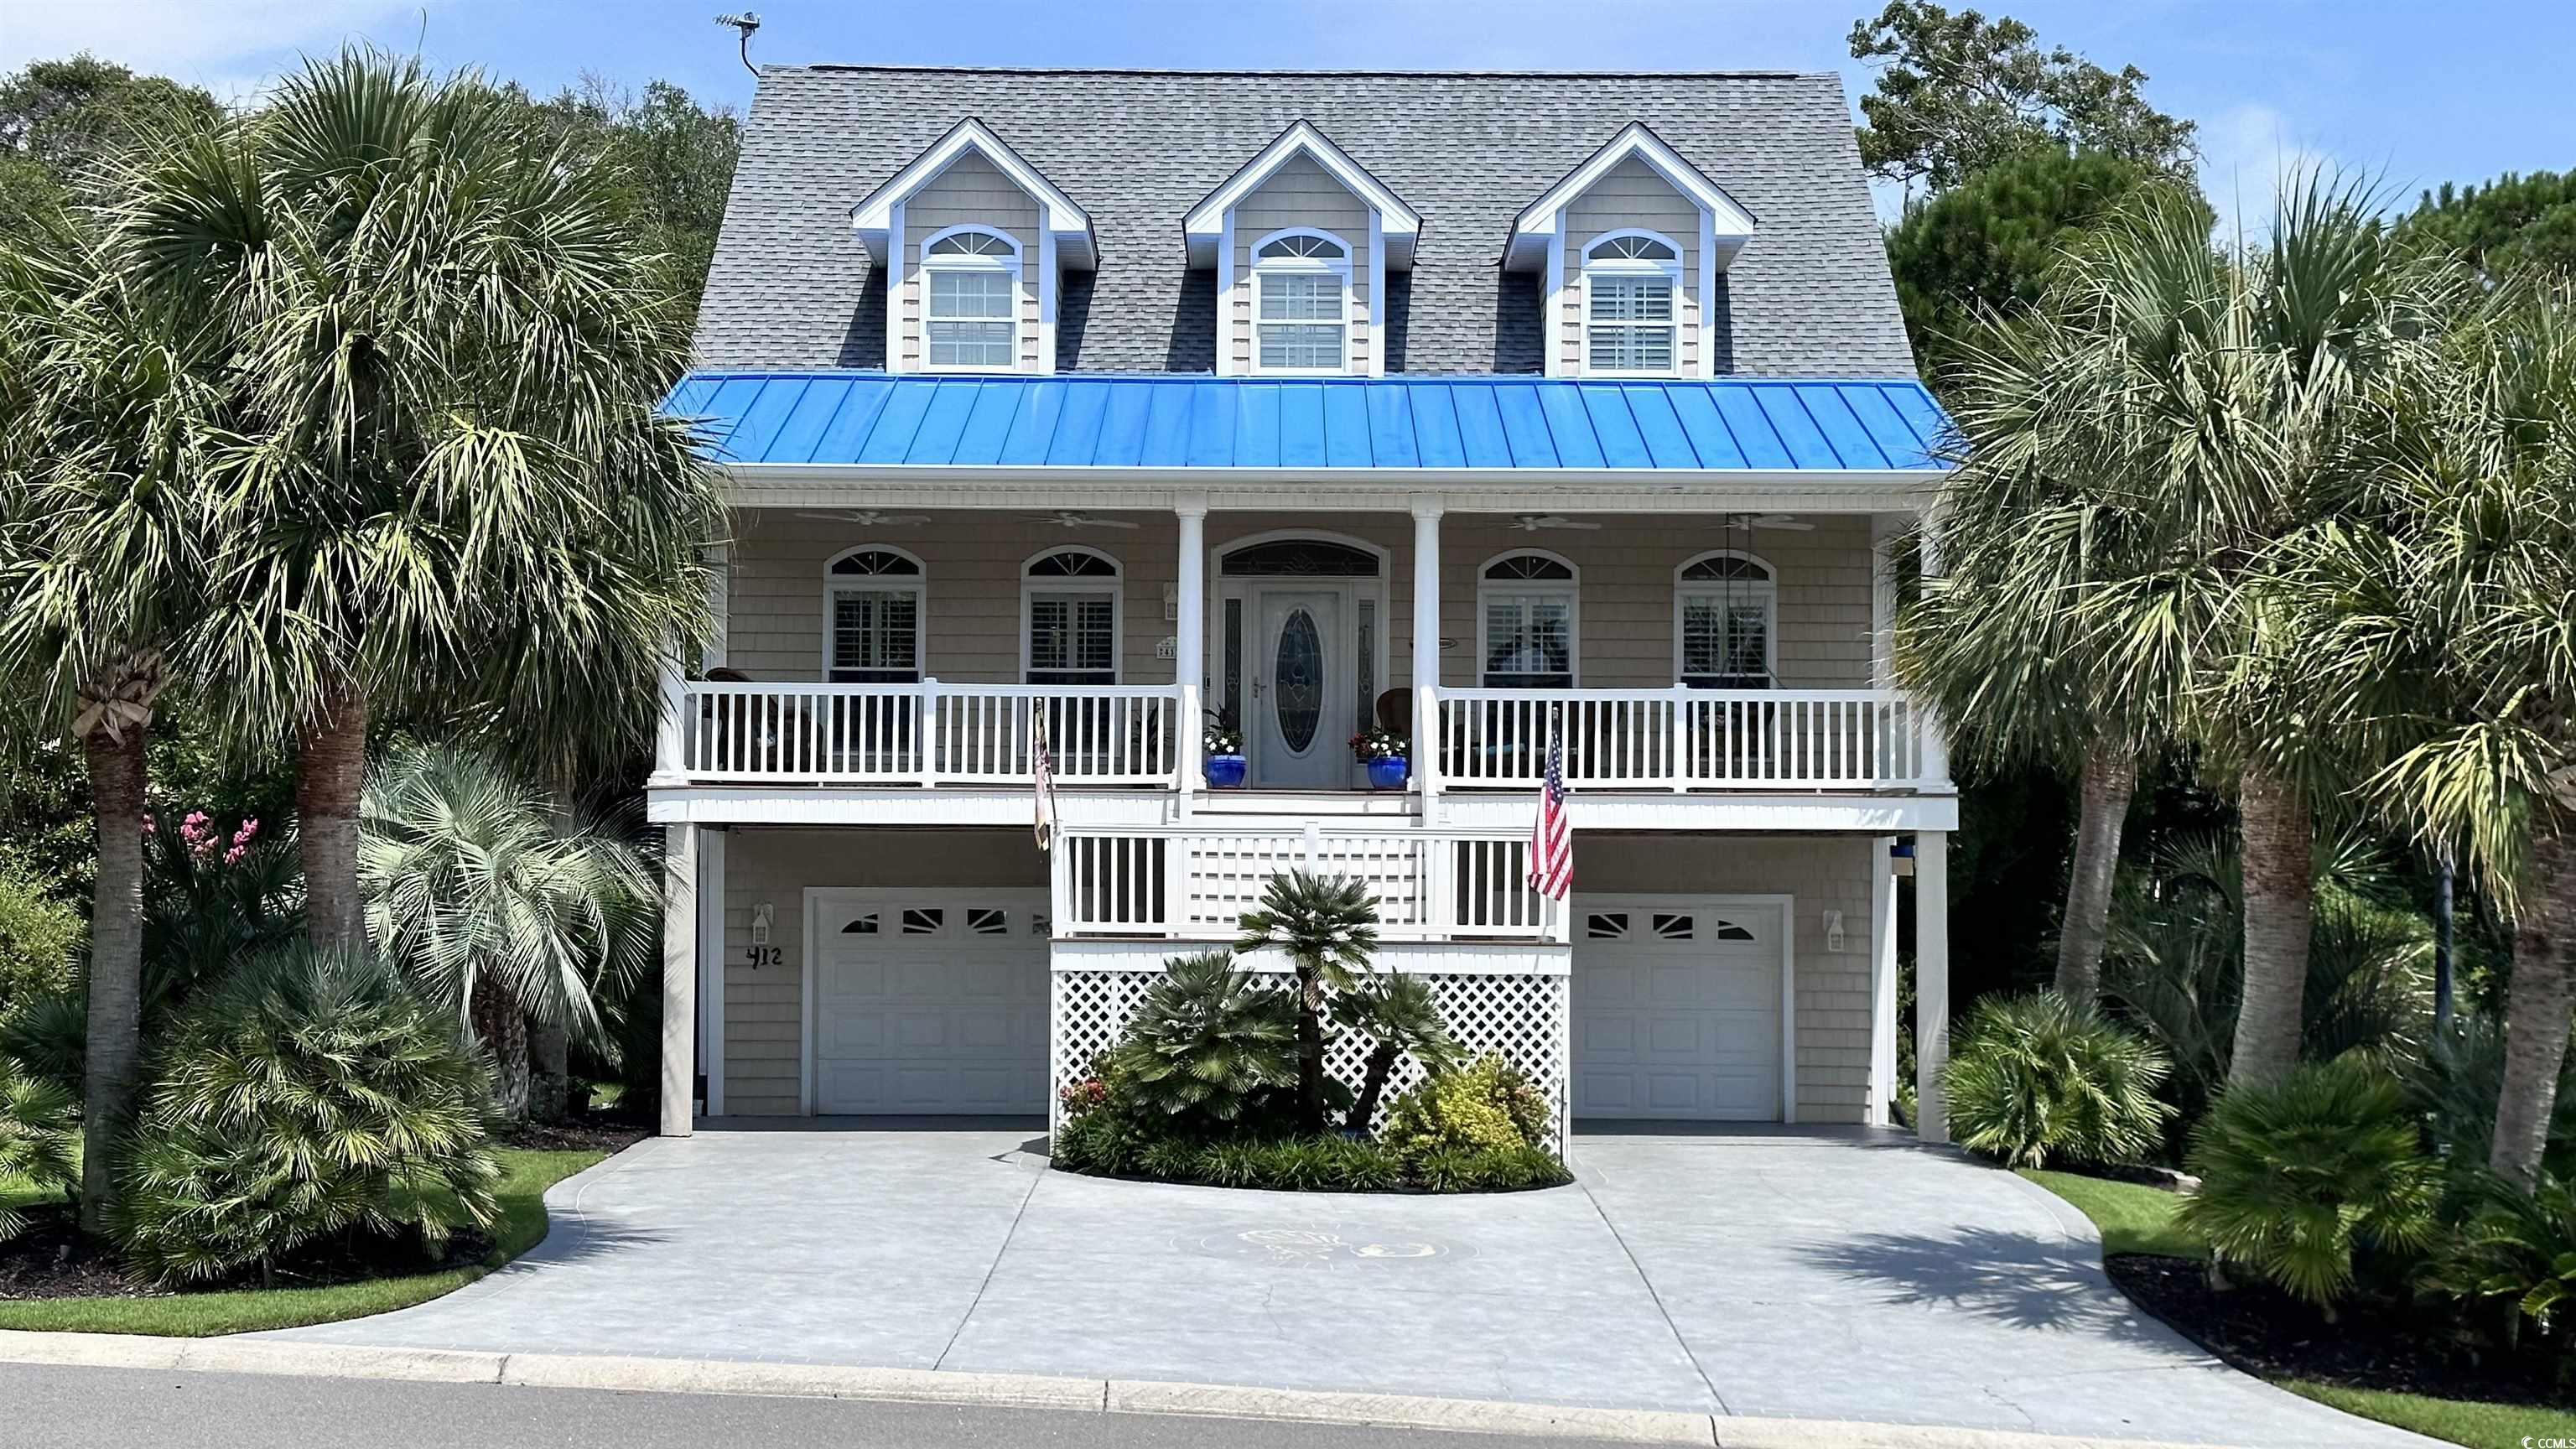 412 5th Ave. S, North Myrtle Beach, SC 29582